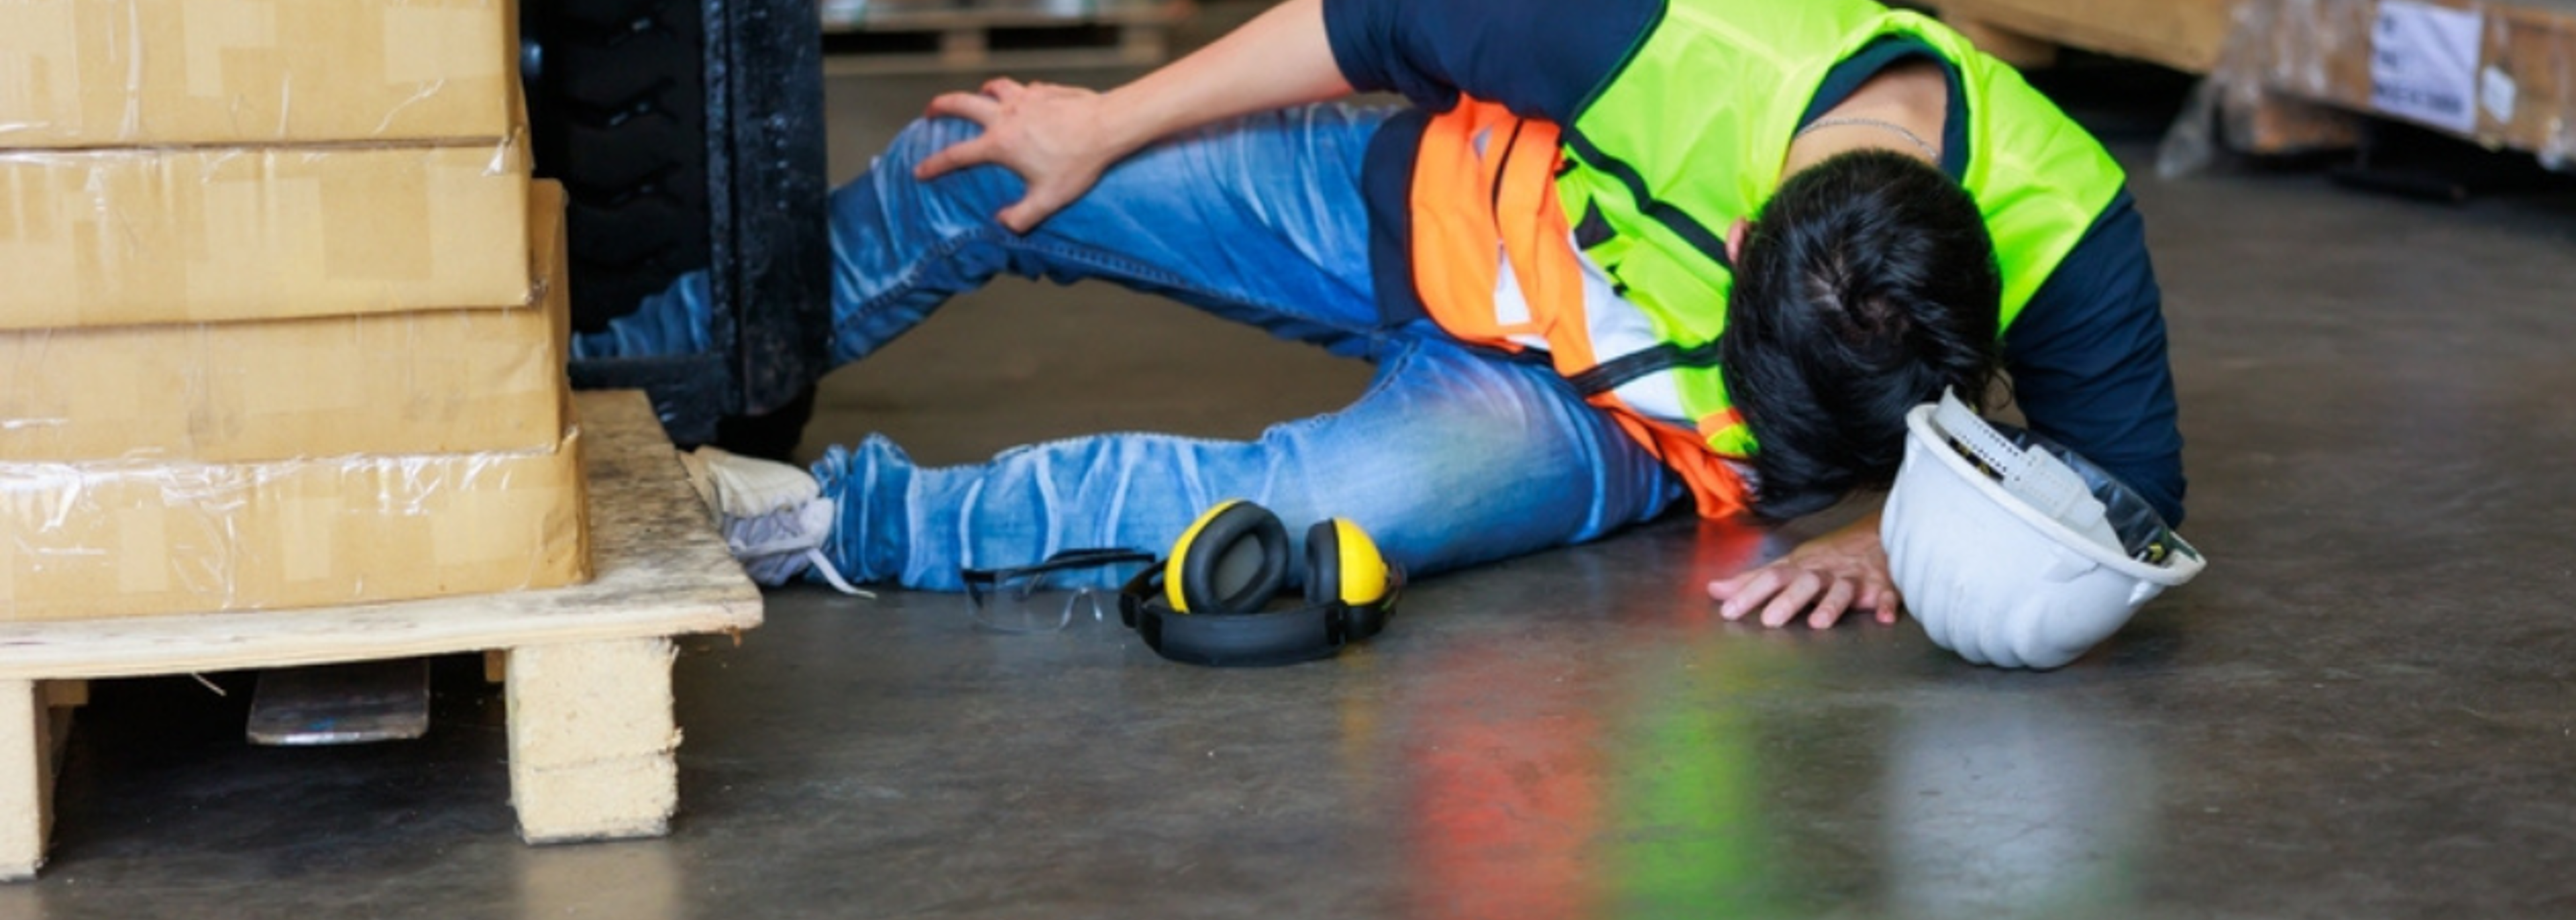 Lack of knowledge hinders reporting of accidents at work